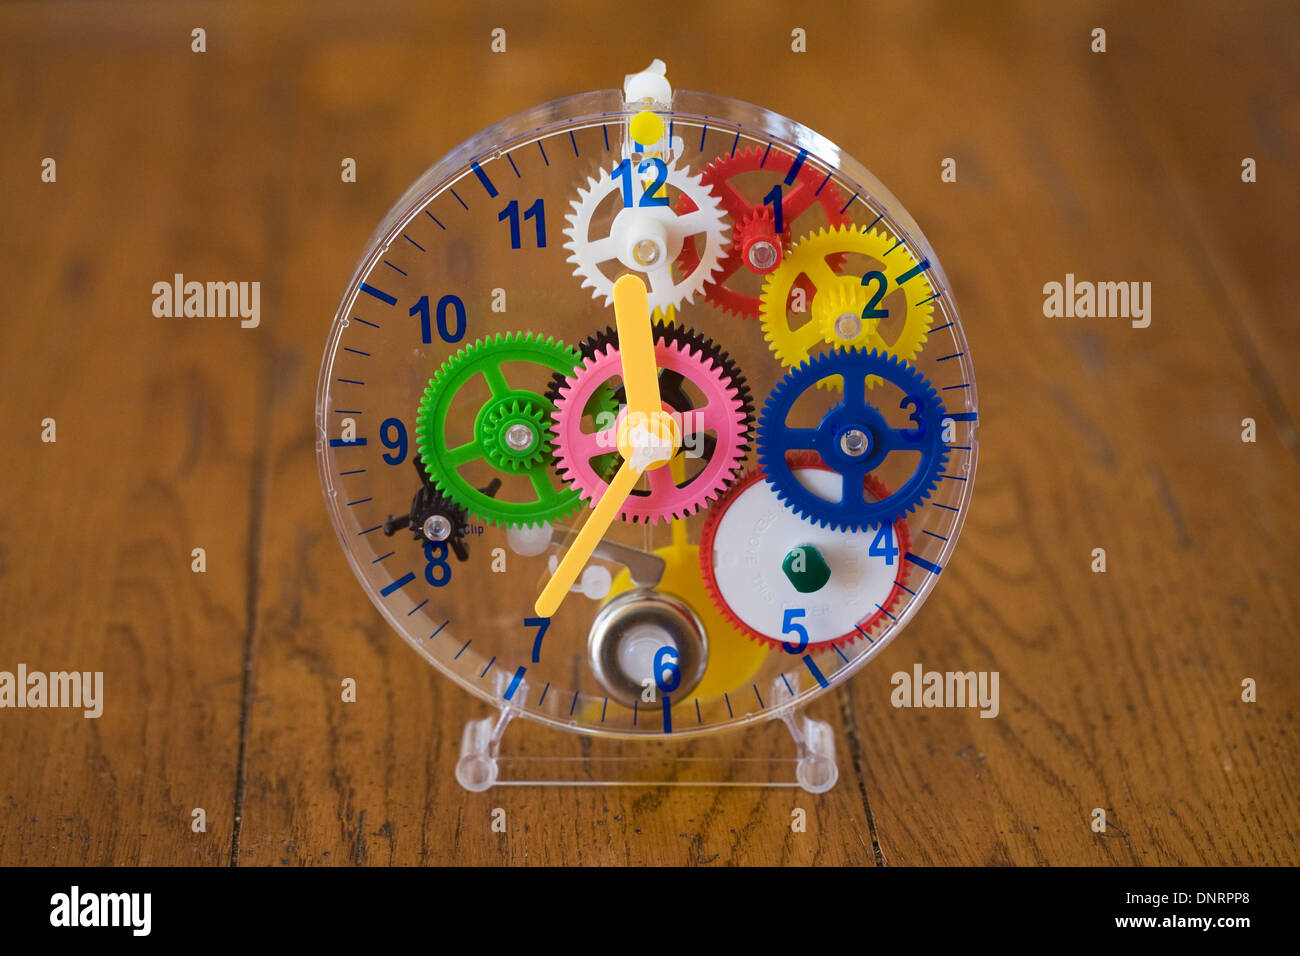 Child's teaching clock on a wooden table. Stock Photo